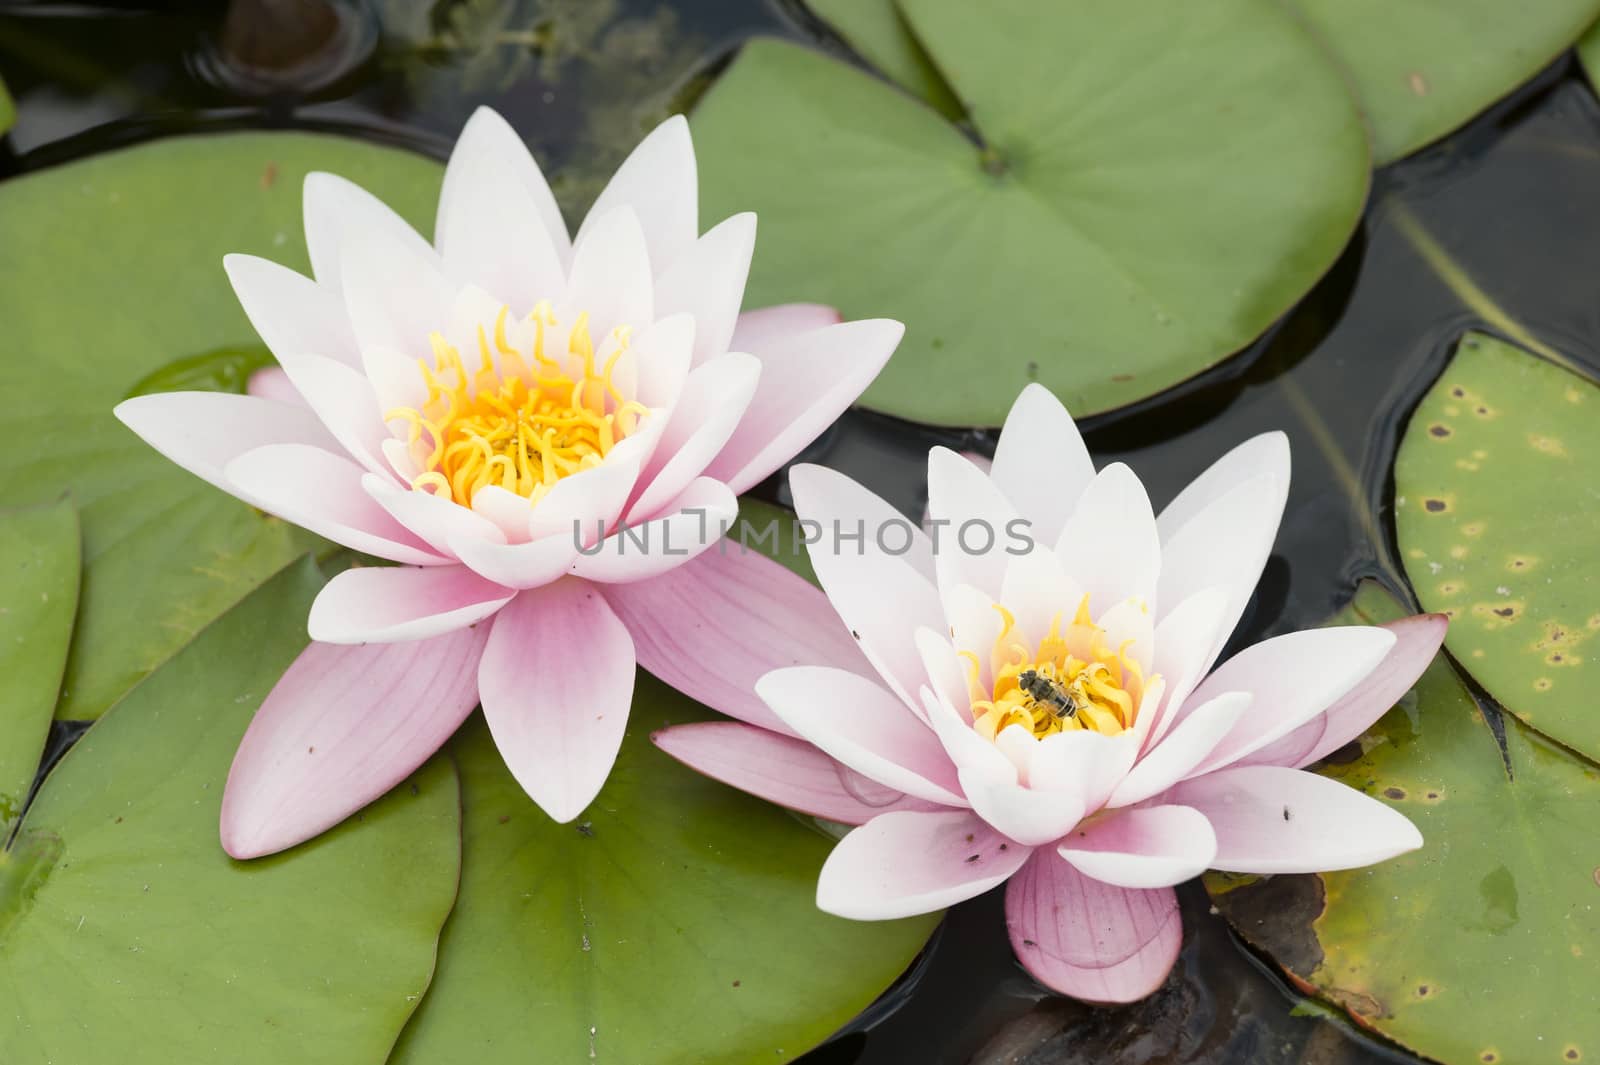 Water lily flowers with green leaves on pond surface